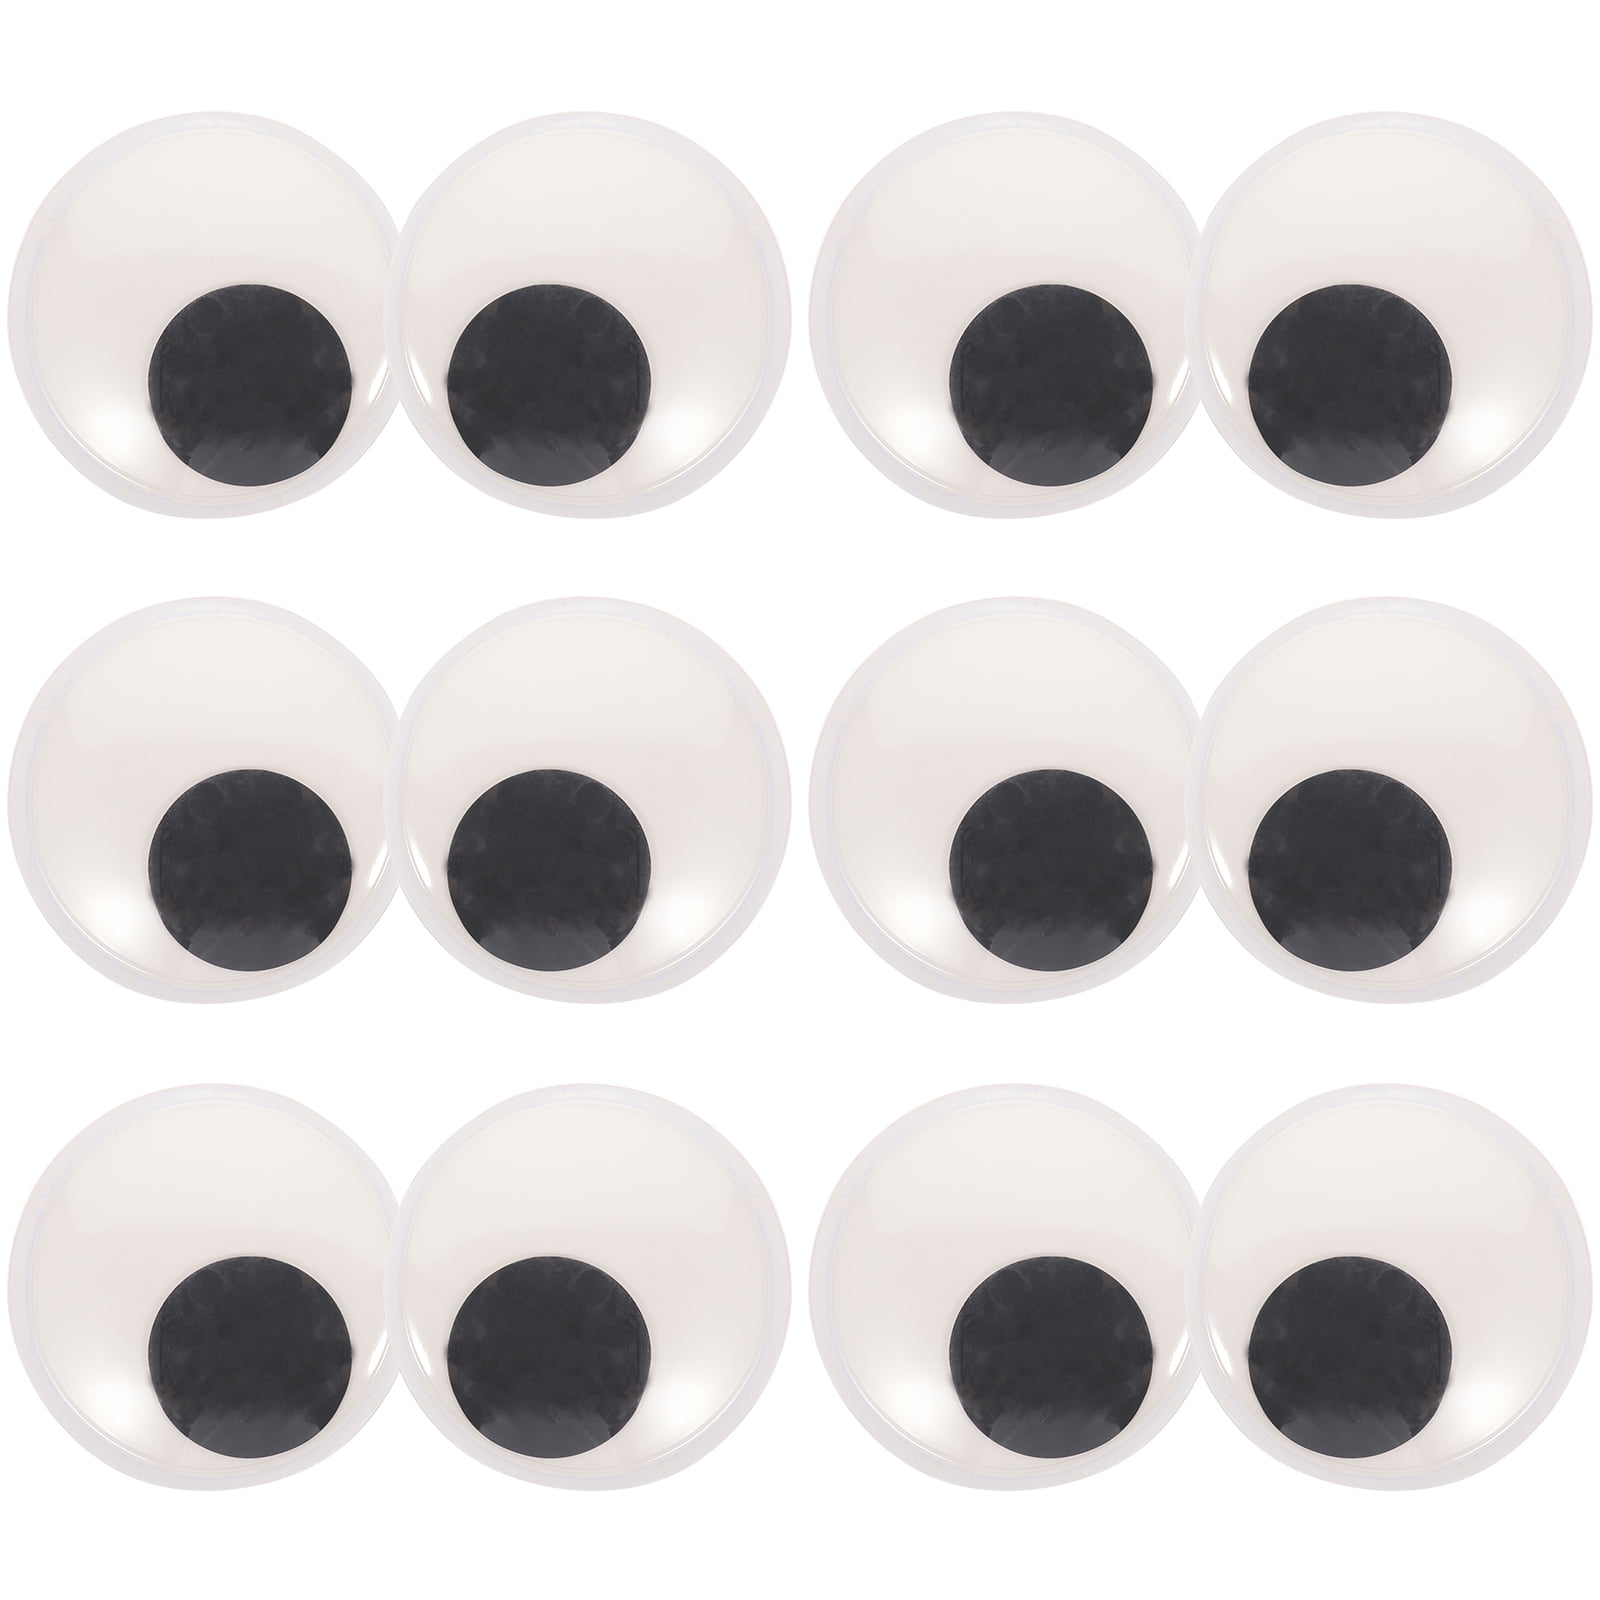 1 Pair 75mm Giant Googly Wiggle Eyes with Self-adhesive for Christmas Tree  Home Party Decor,Super Funny